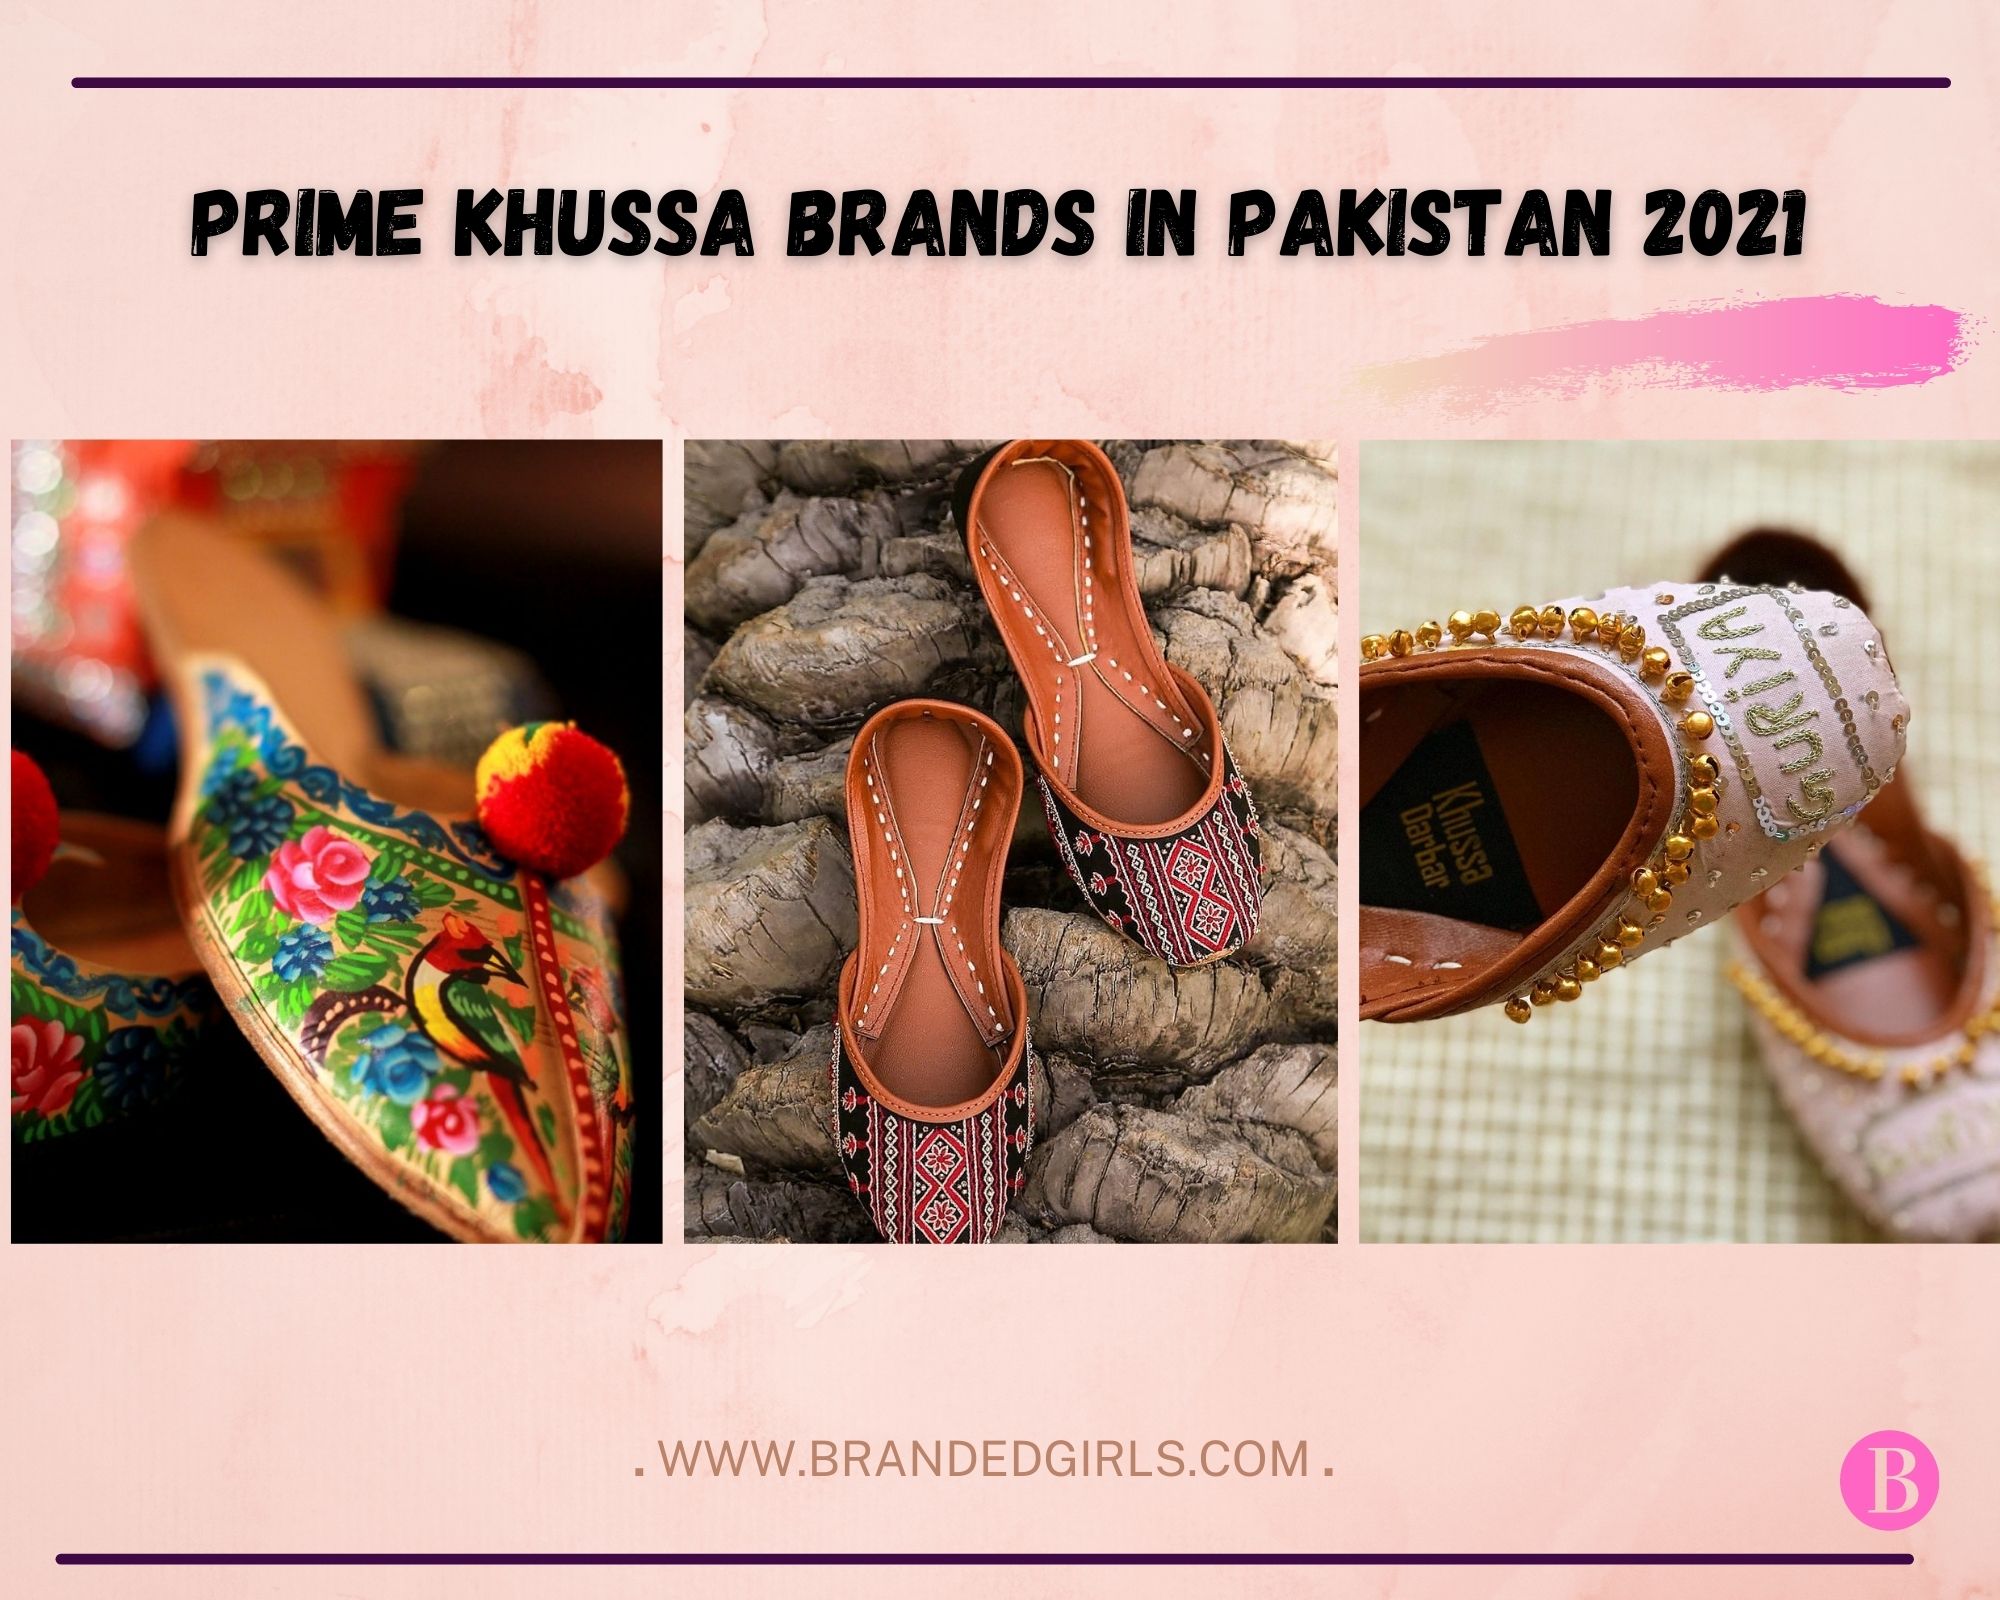 Lv Embroidered Slippers Best Price In Pakistan, Rs 2500